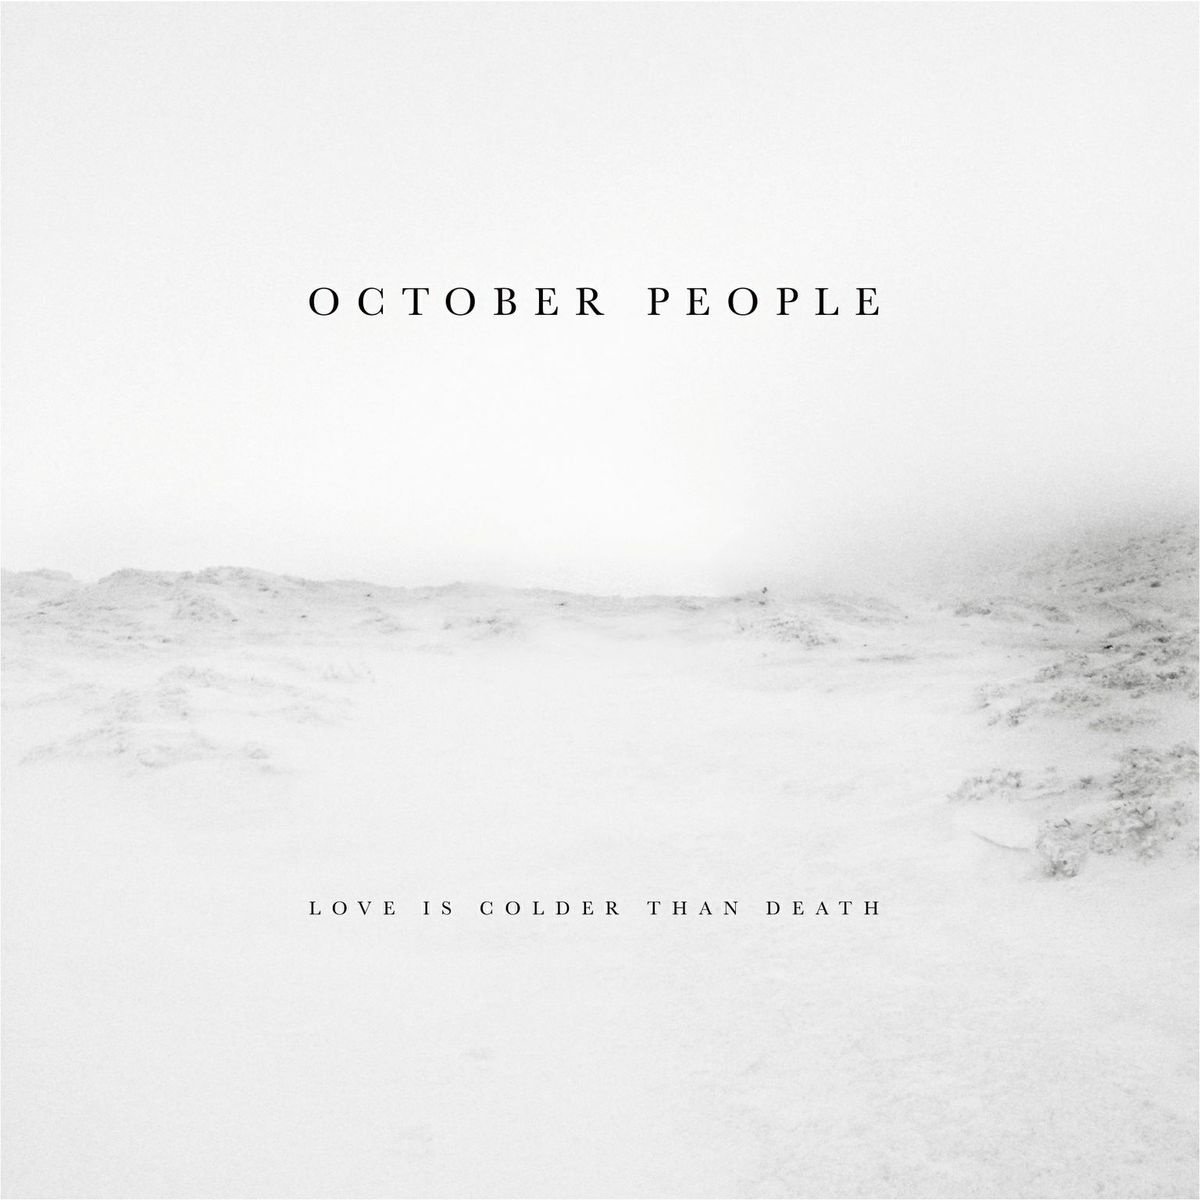 OCTOBER PEOPLE: Love is Colder Than Death (Rumble Records/Trilobite Records/Black Leaf Records 2014)